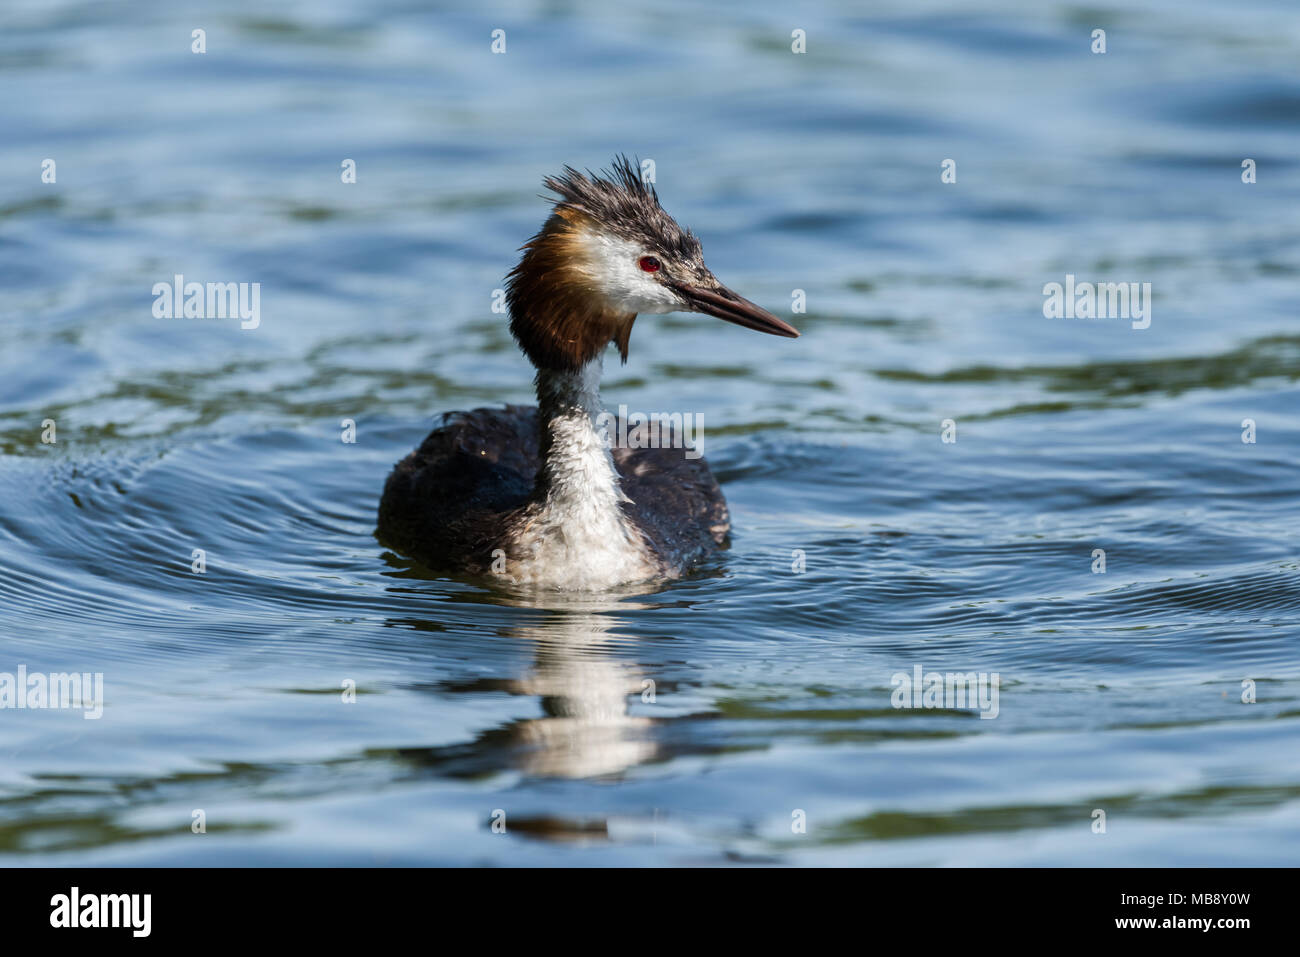 A great crested grebe (podiceps cristatus) is swimming on the water surface, looking interested and still wet from the last dive. Stock Photo